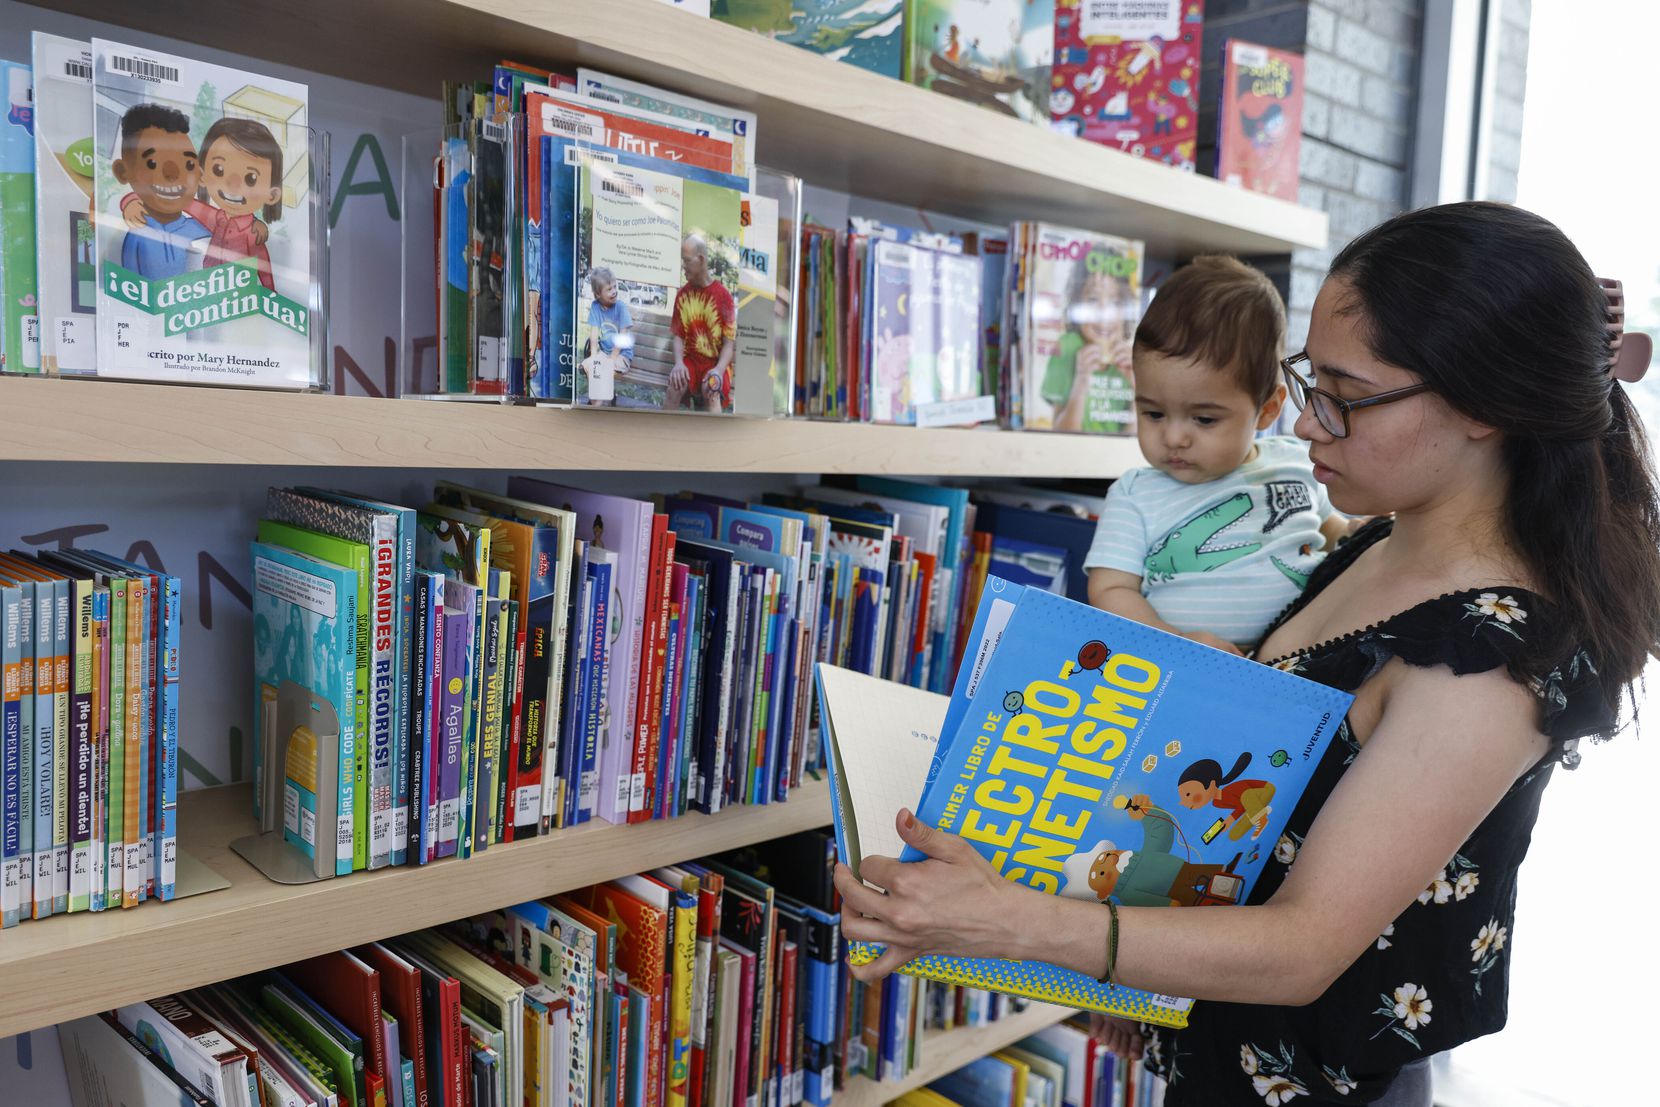 Half Price Books officially opens in Irving